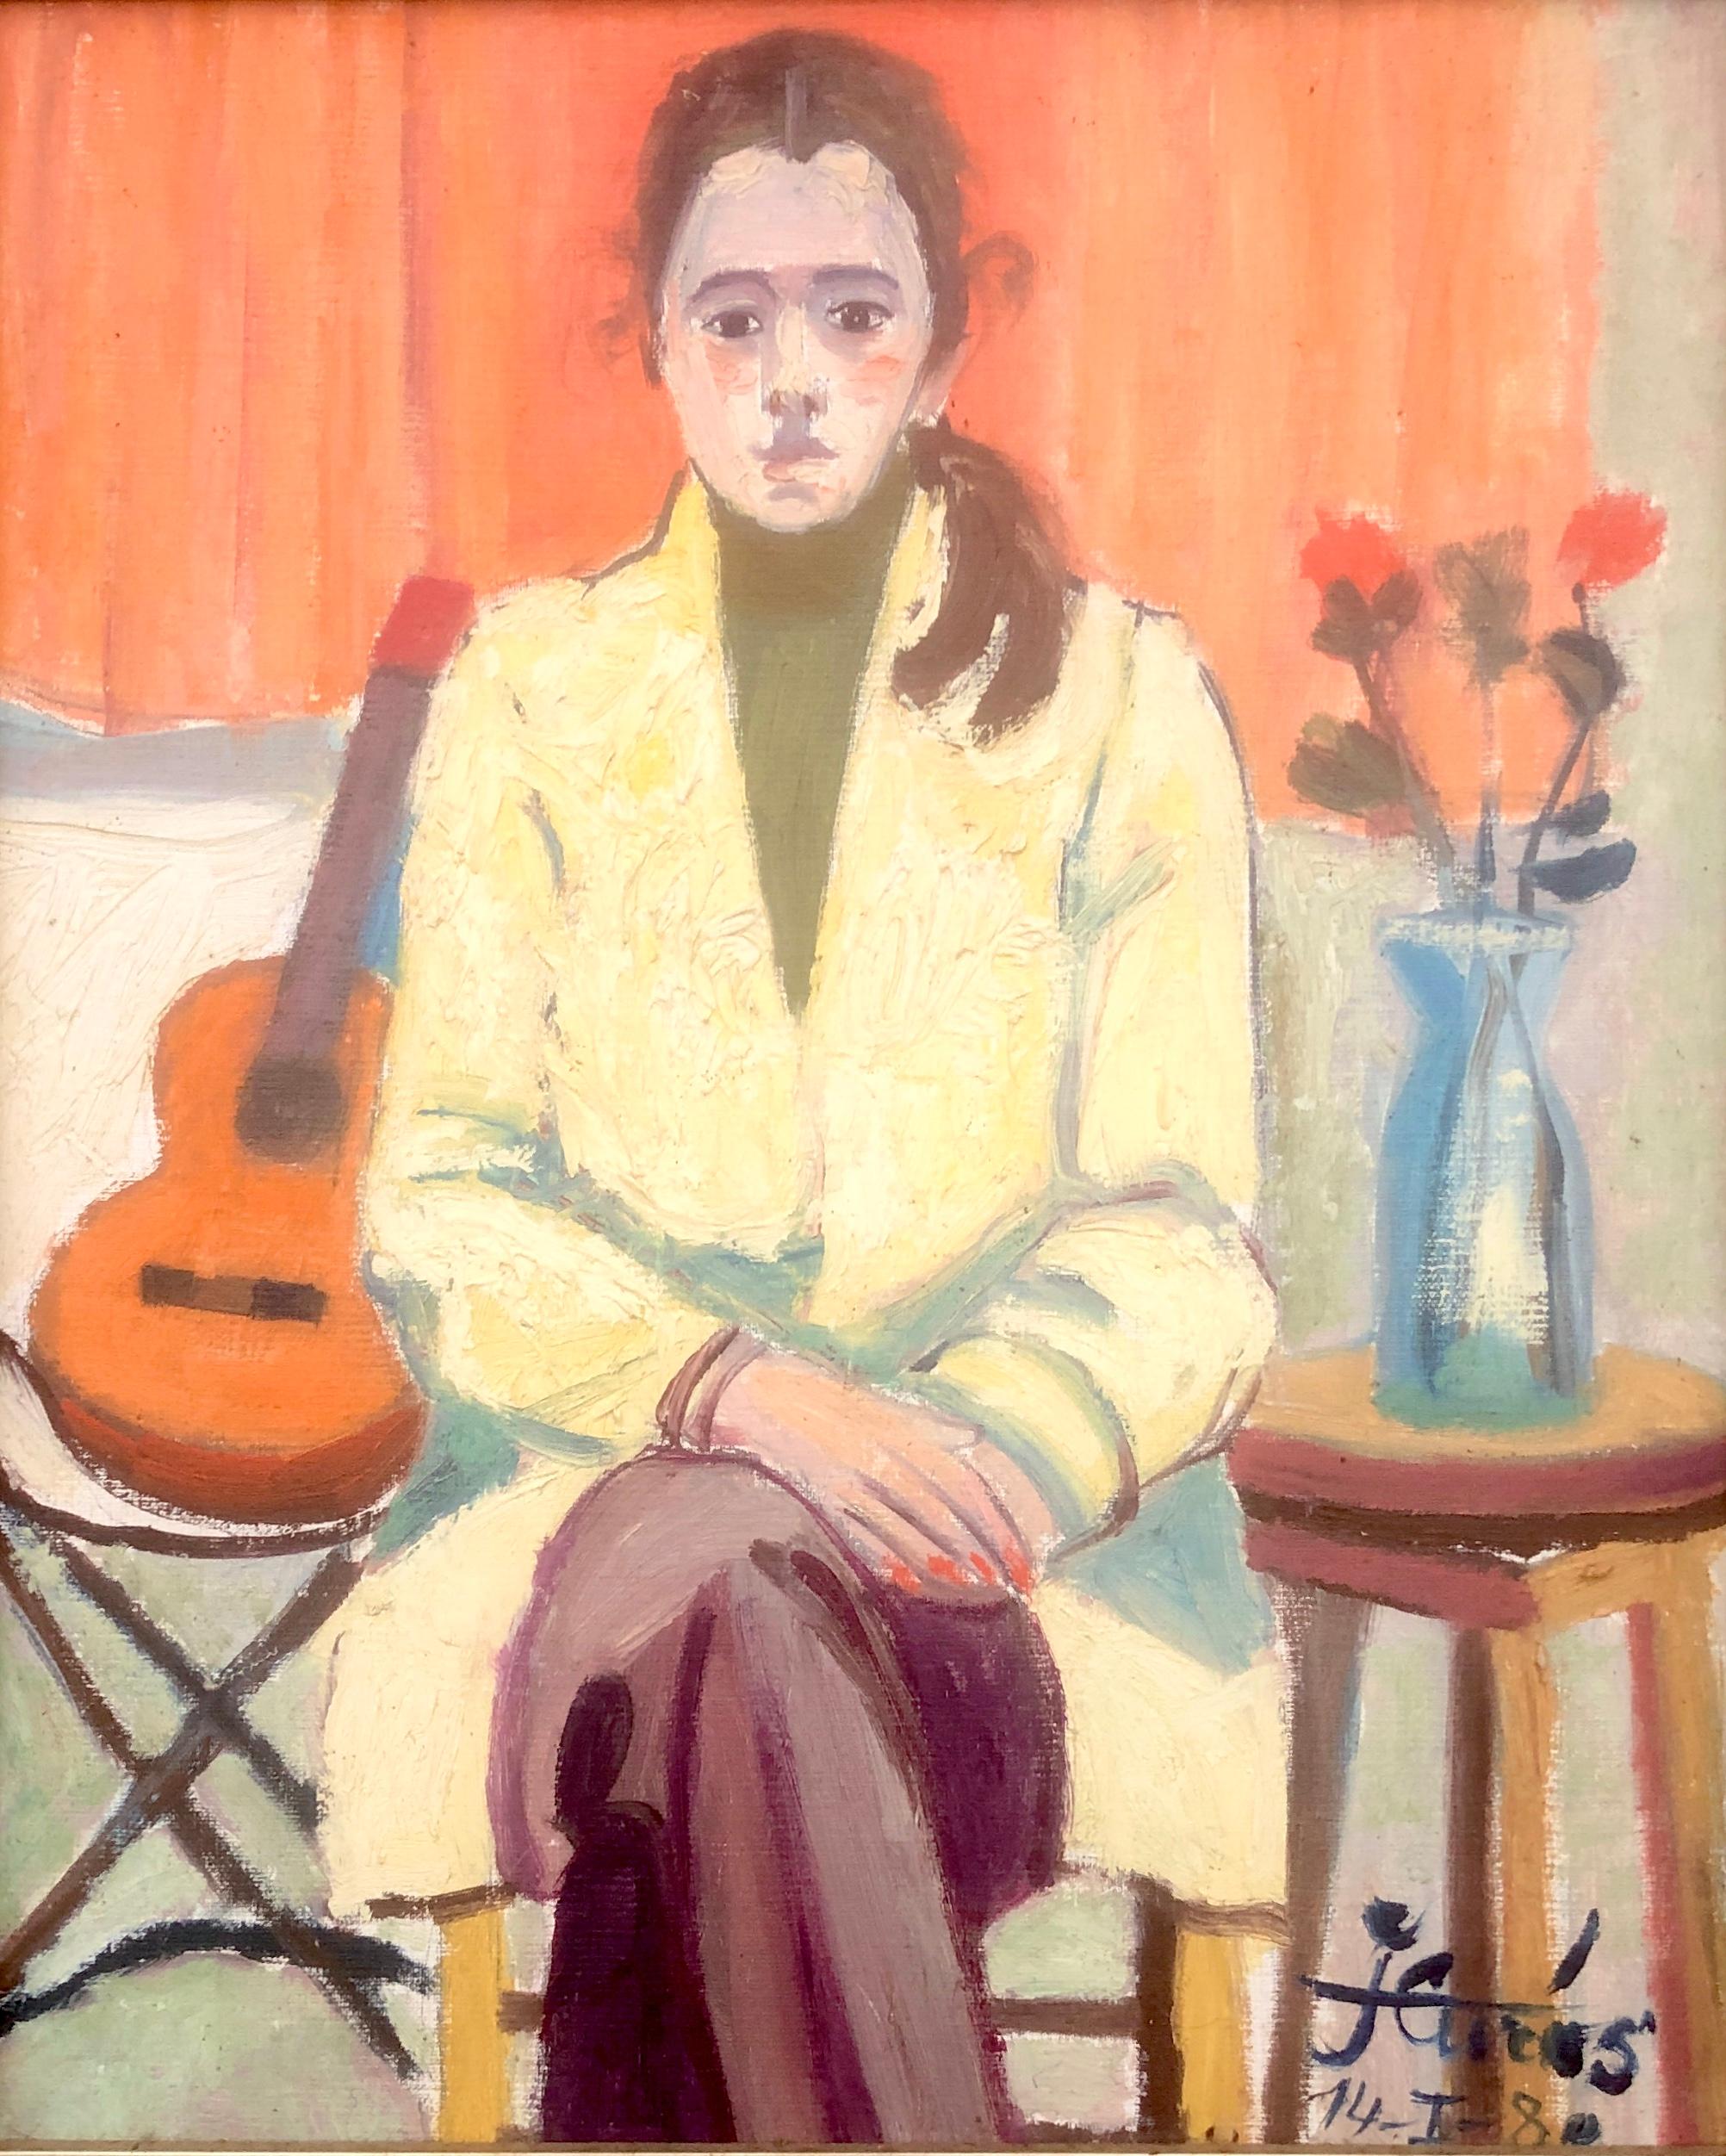 Jordi Curos Figurative Painting - Woman and guitar oil on board painting fauvism